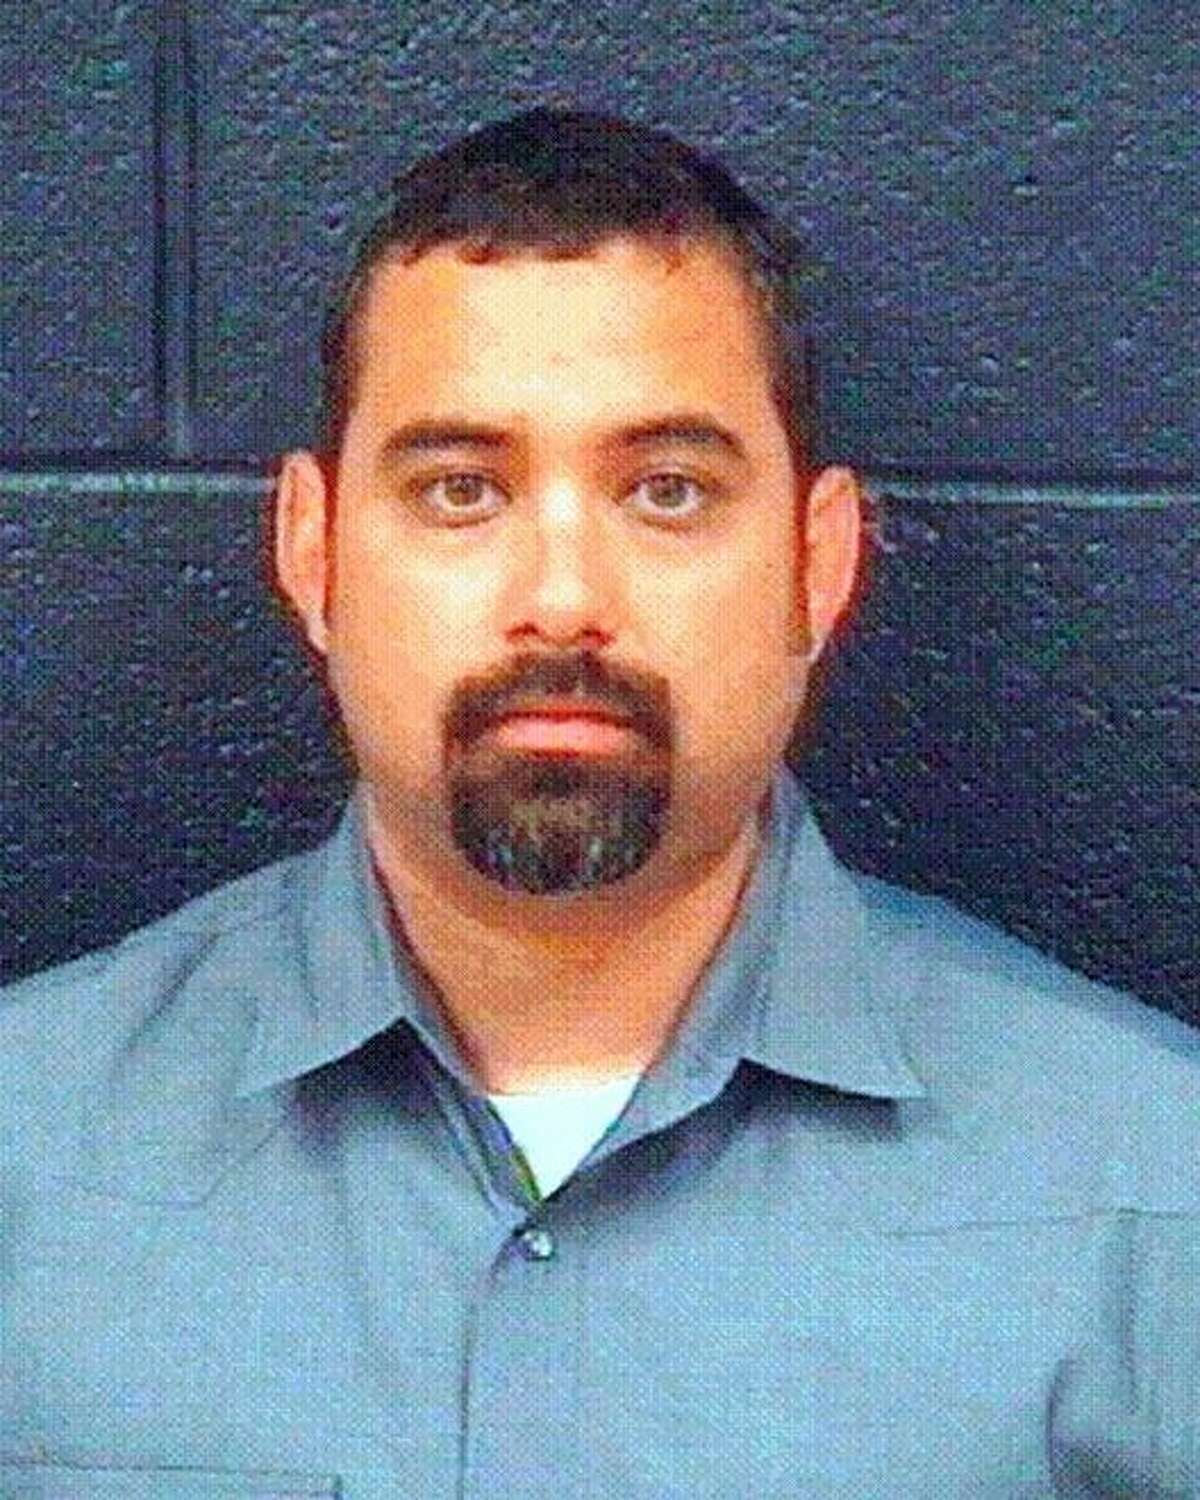 Robert Daniel Perez, owner of Lone Star Autoplex, entered a guilty plea to theft in the 406th District Court.